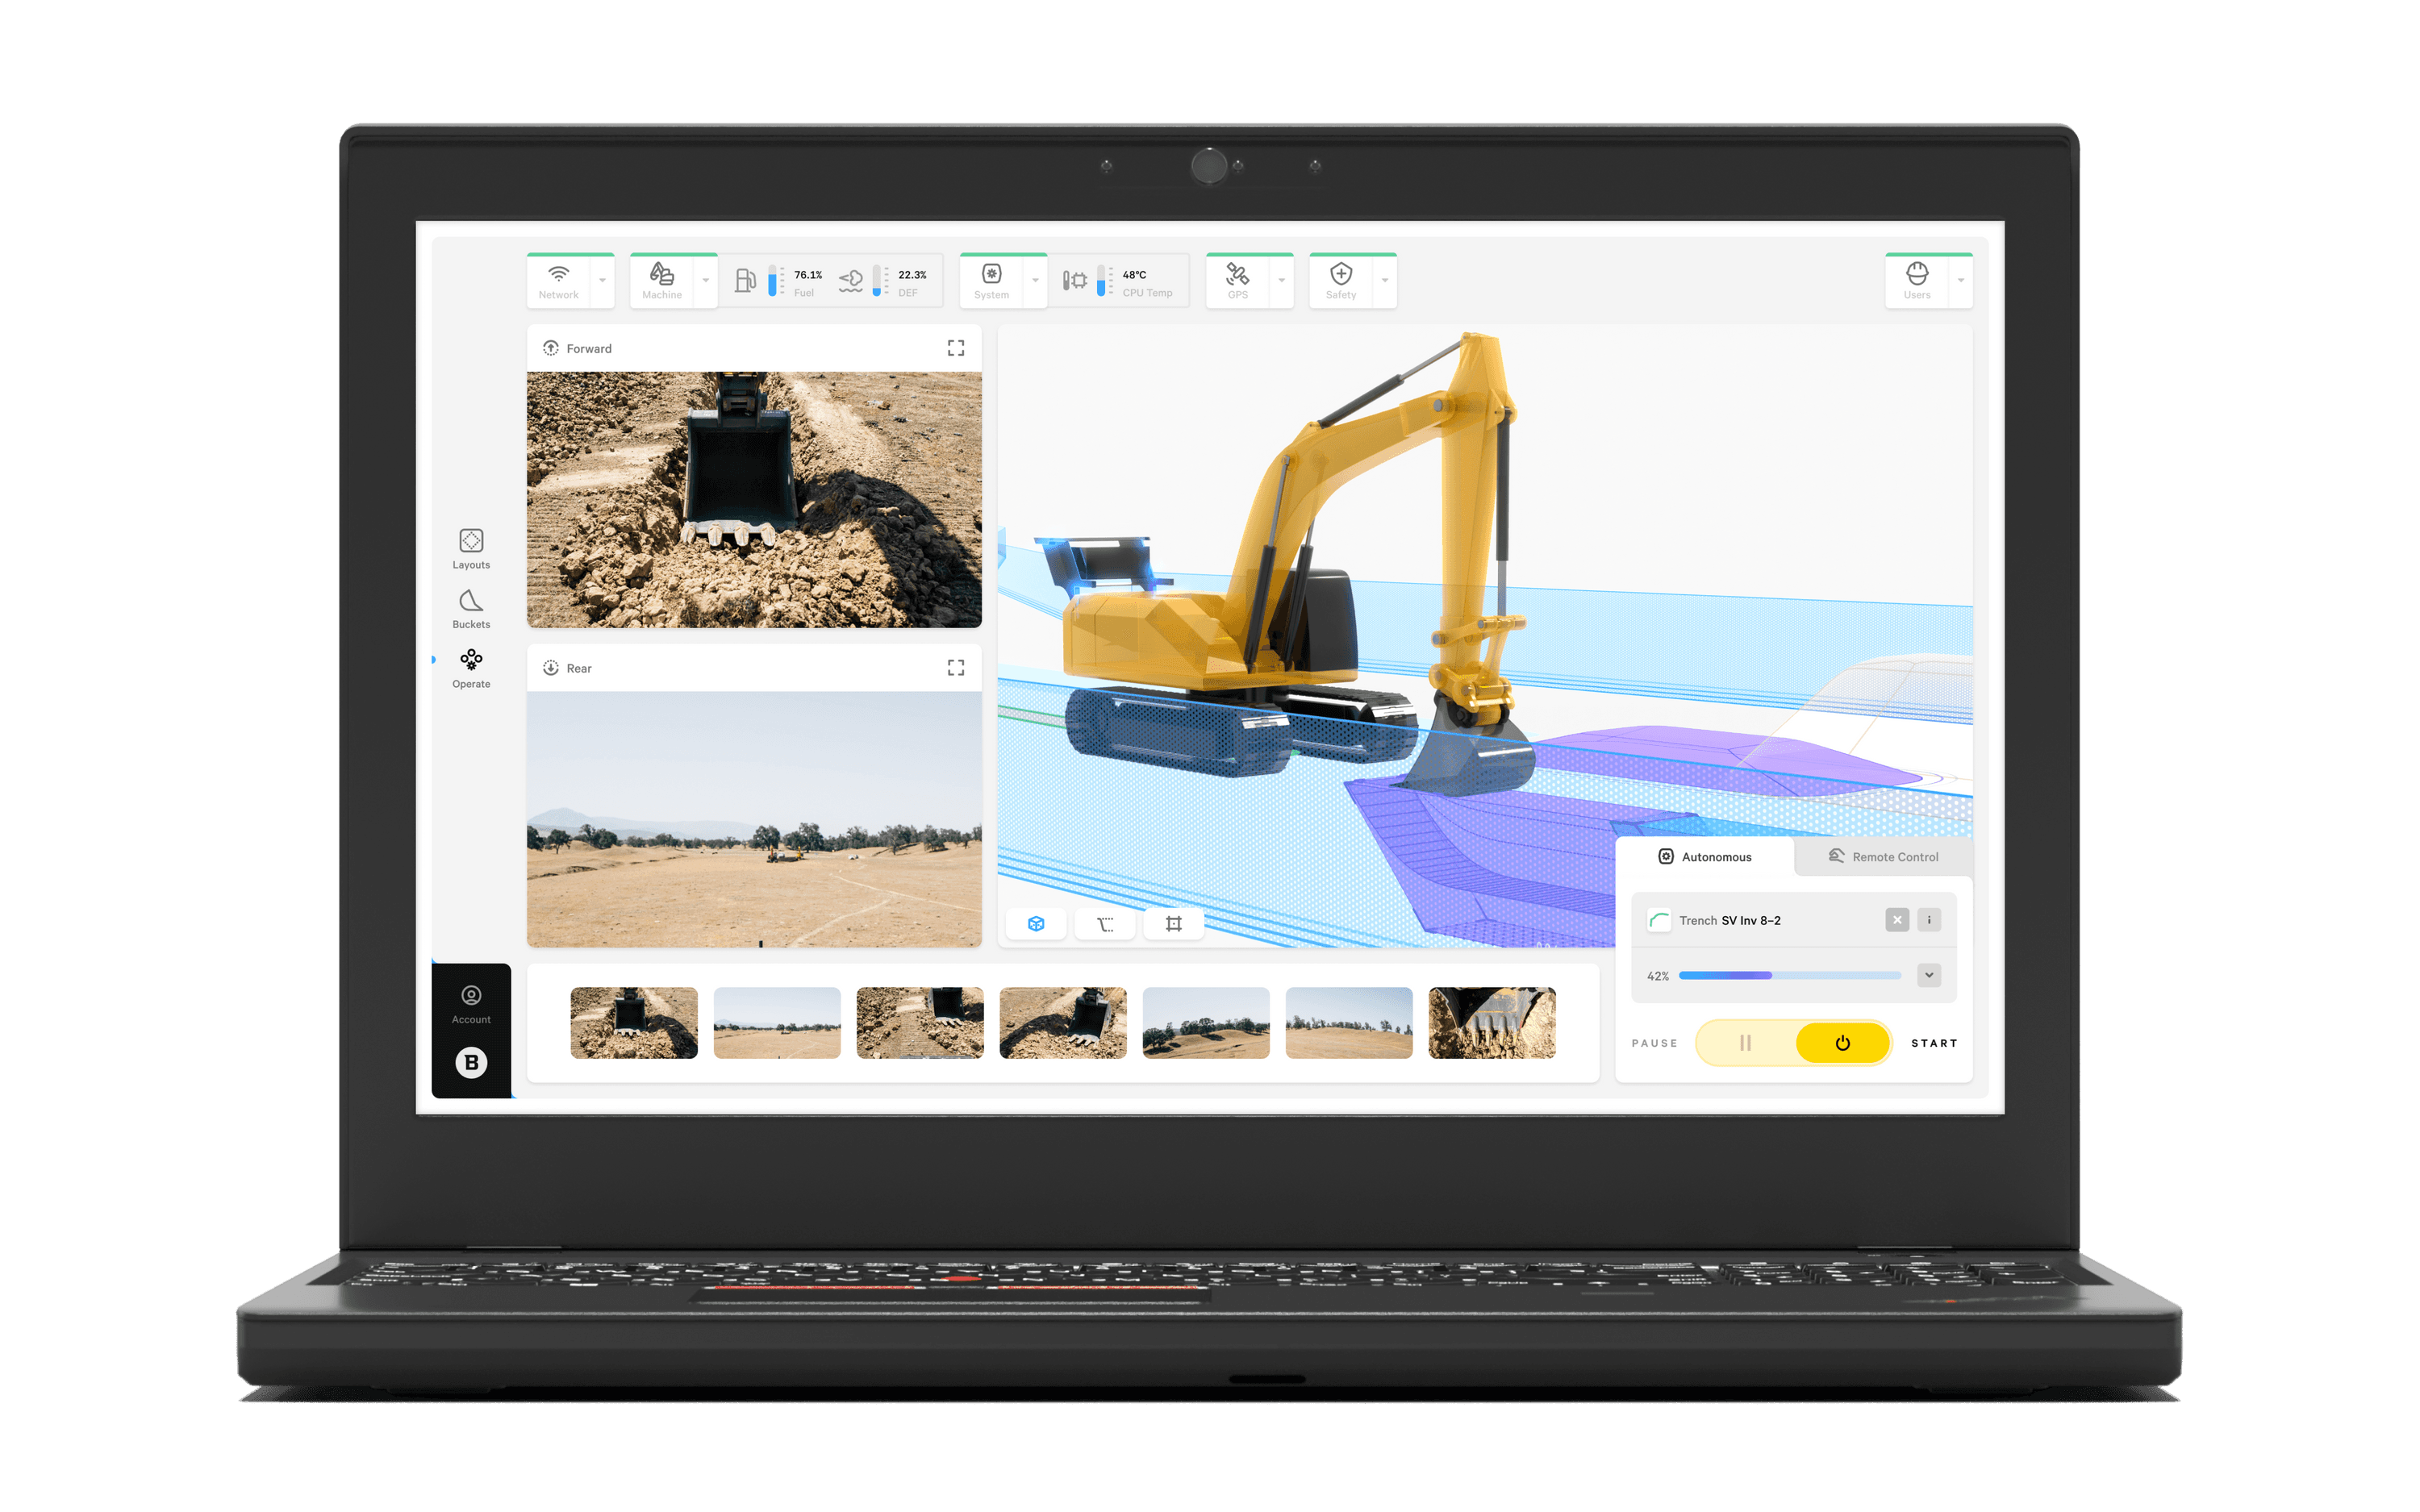 A Render of Everest on a Laptop Showing a Robot Digging a Trench Autonomously